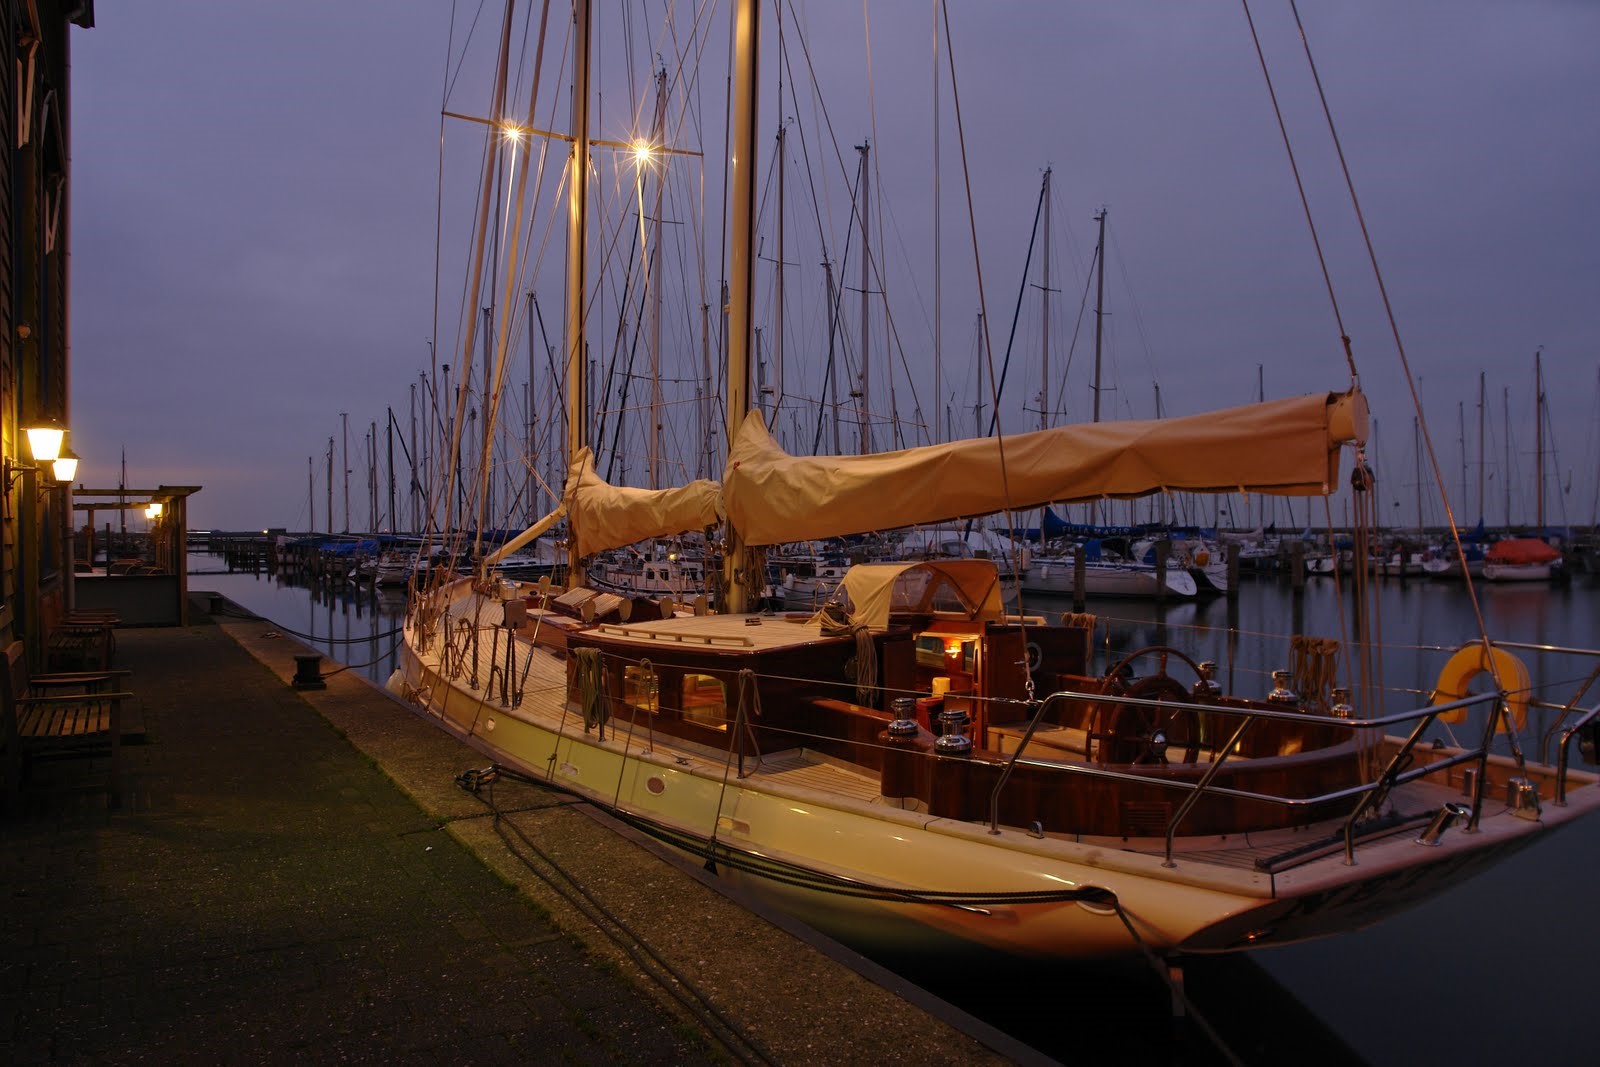 This picture shows the lifting keel, classic cruising yacht ‘Ahoy’ moored at port. She is enhanced for serious offshore cruising, and is available for sale through OC Performance Yacht Brokers. 